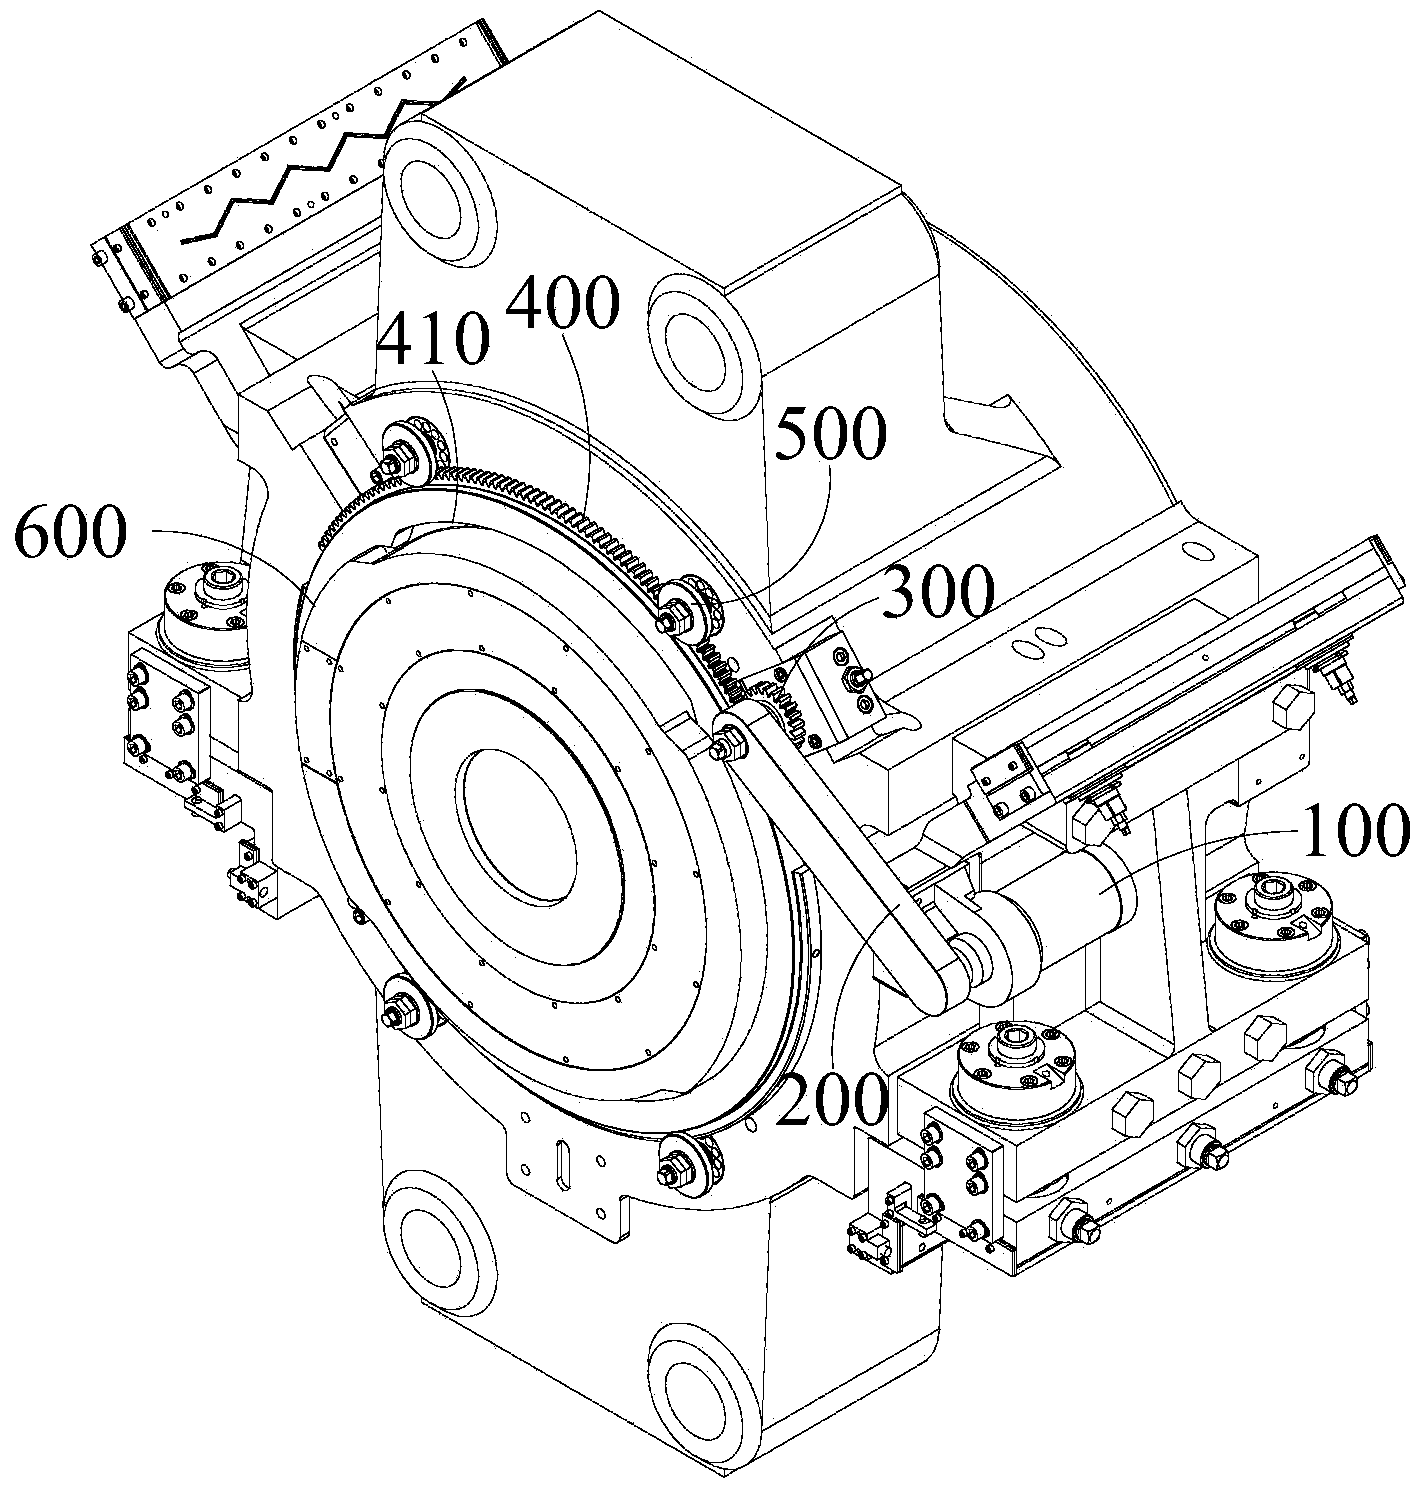 Changing device of extrusion container assembly